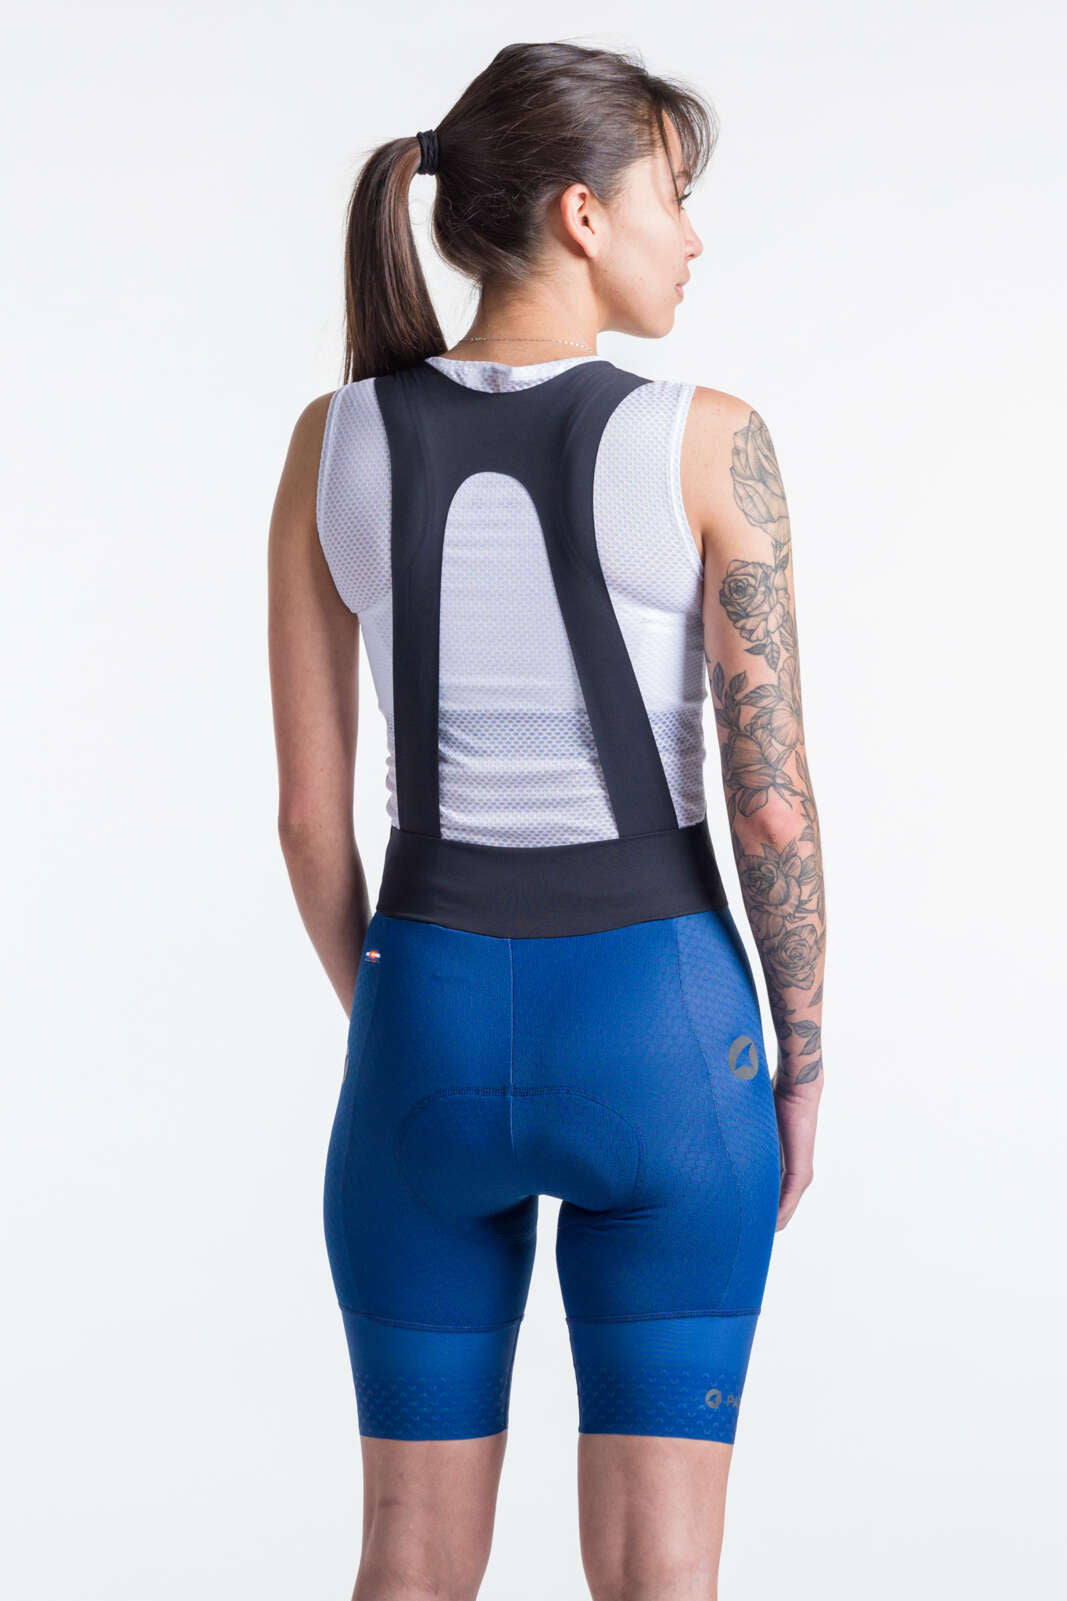 Women's Compression Navy Blue Cycling Bibs - Back View